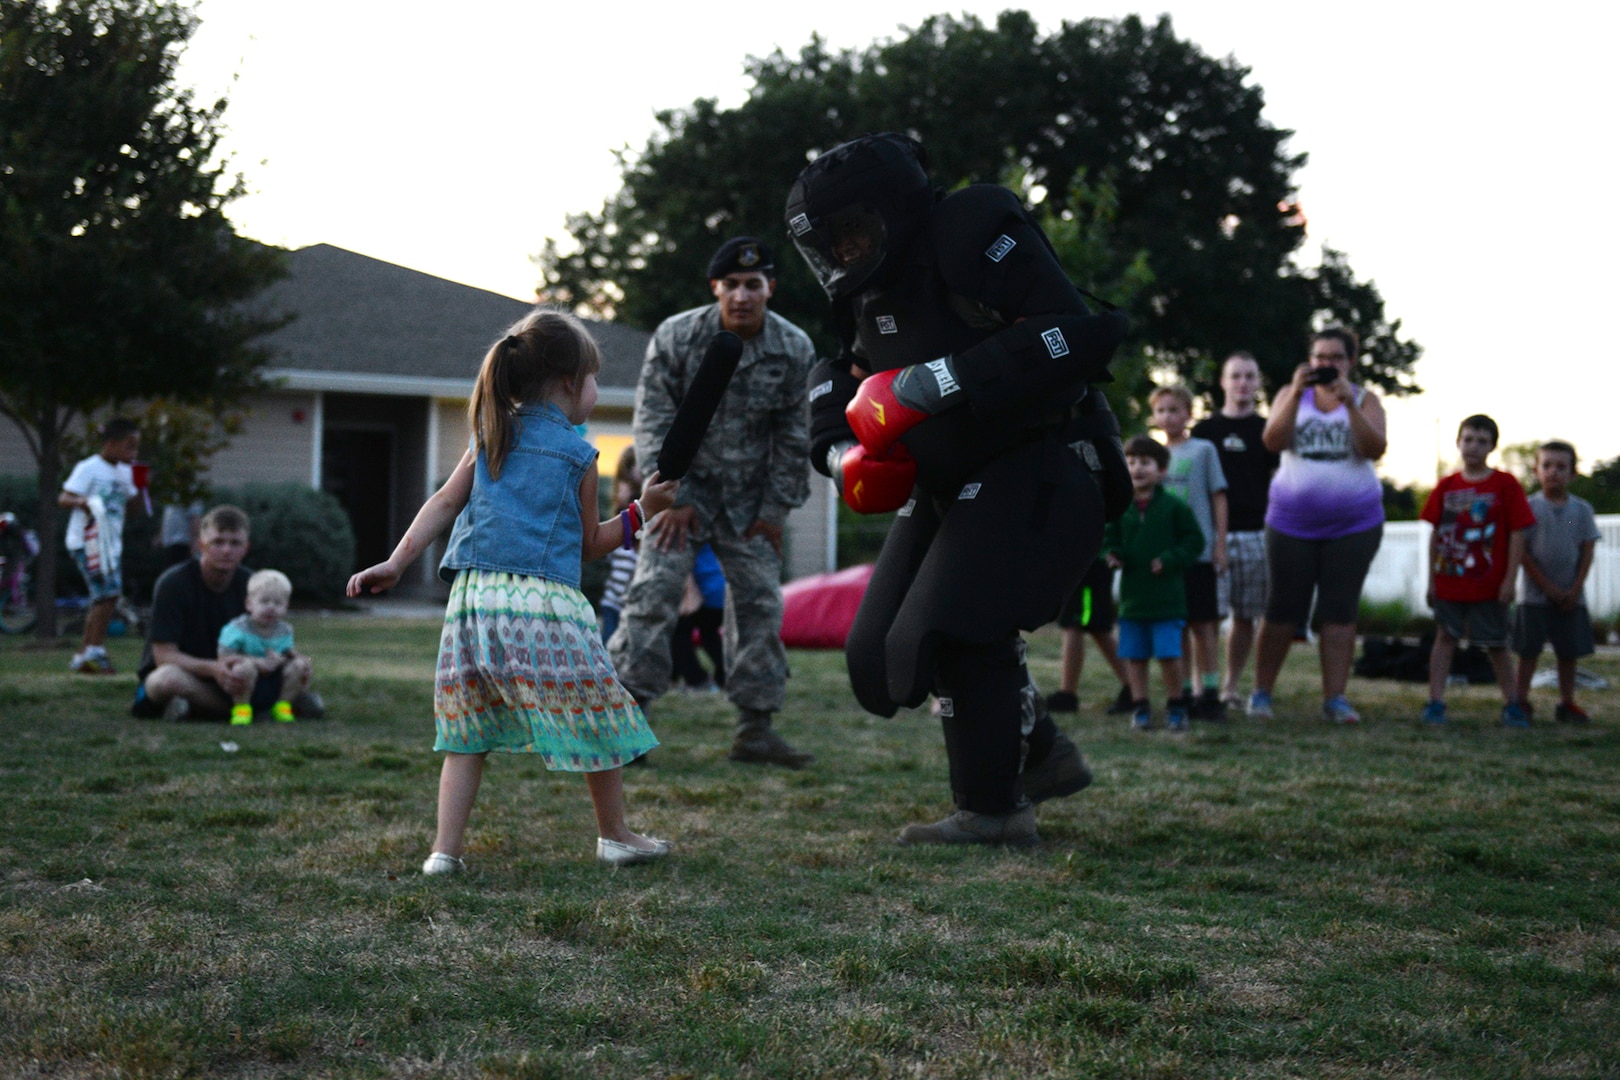 Senior Airman Taylor Williamson, 802nd Security Forces Squadron armory technician, speaks to children at examine the firearms displays, the Humvee, police cars and other police vehicles during National Night Out Oct. 6, 2015, at Joint Base San Antonio-Lackland, Texas. At the annual event there was also a bouncy castle, fire trucks, face painting station, a station that taught how to use a taser and a station that taught children scare away attackers with a baton. (U.S. Air Force photo by Senior Airman Krystal Wright/Released)